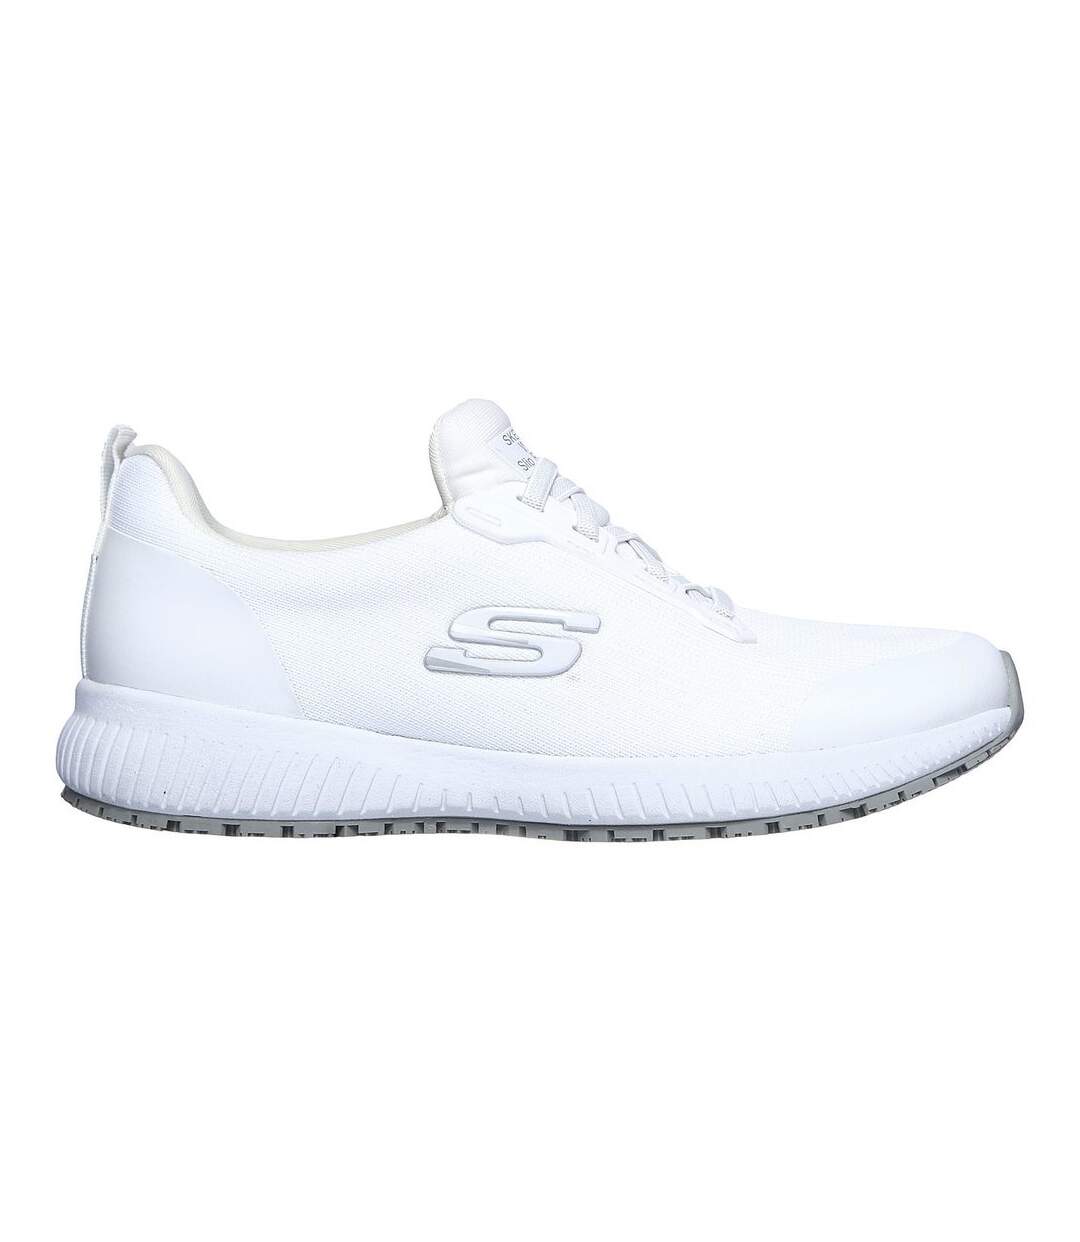 Skechers Womens/Ladies Squad Lace Up Safety Shoes (White) - UTFS6114